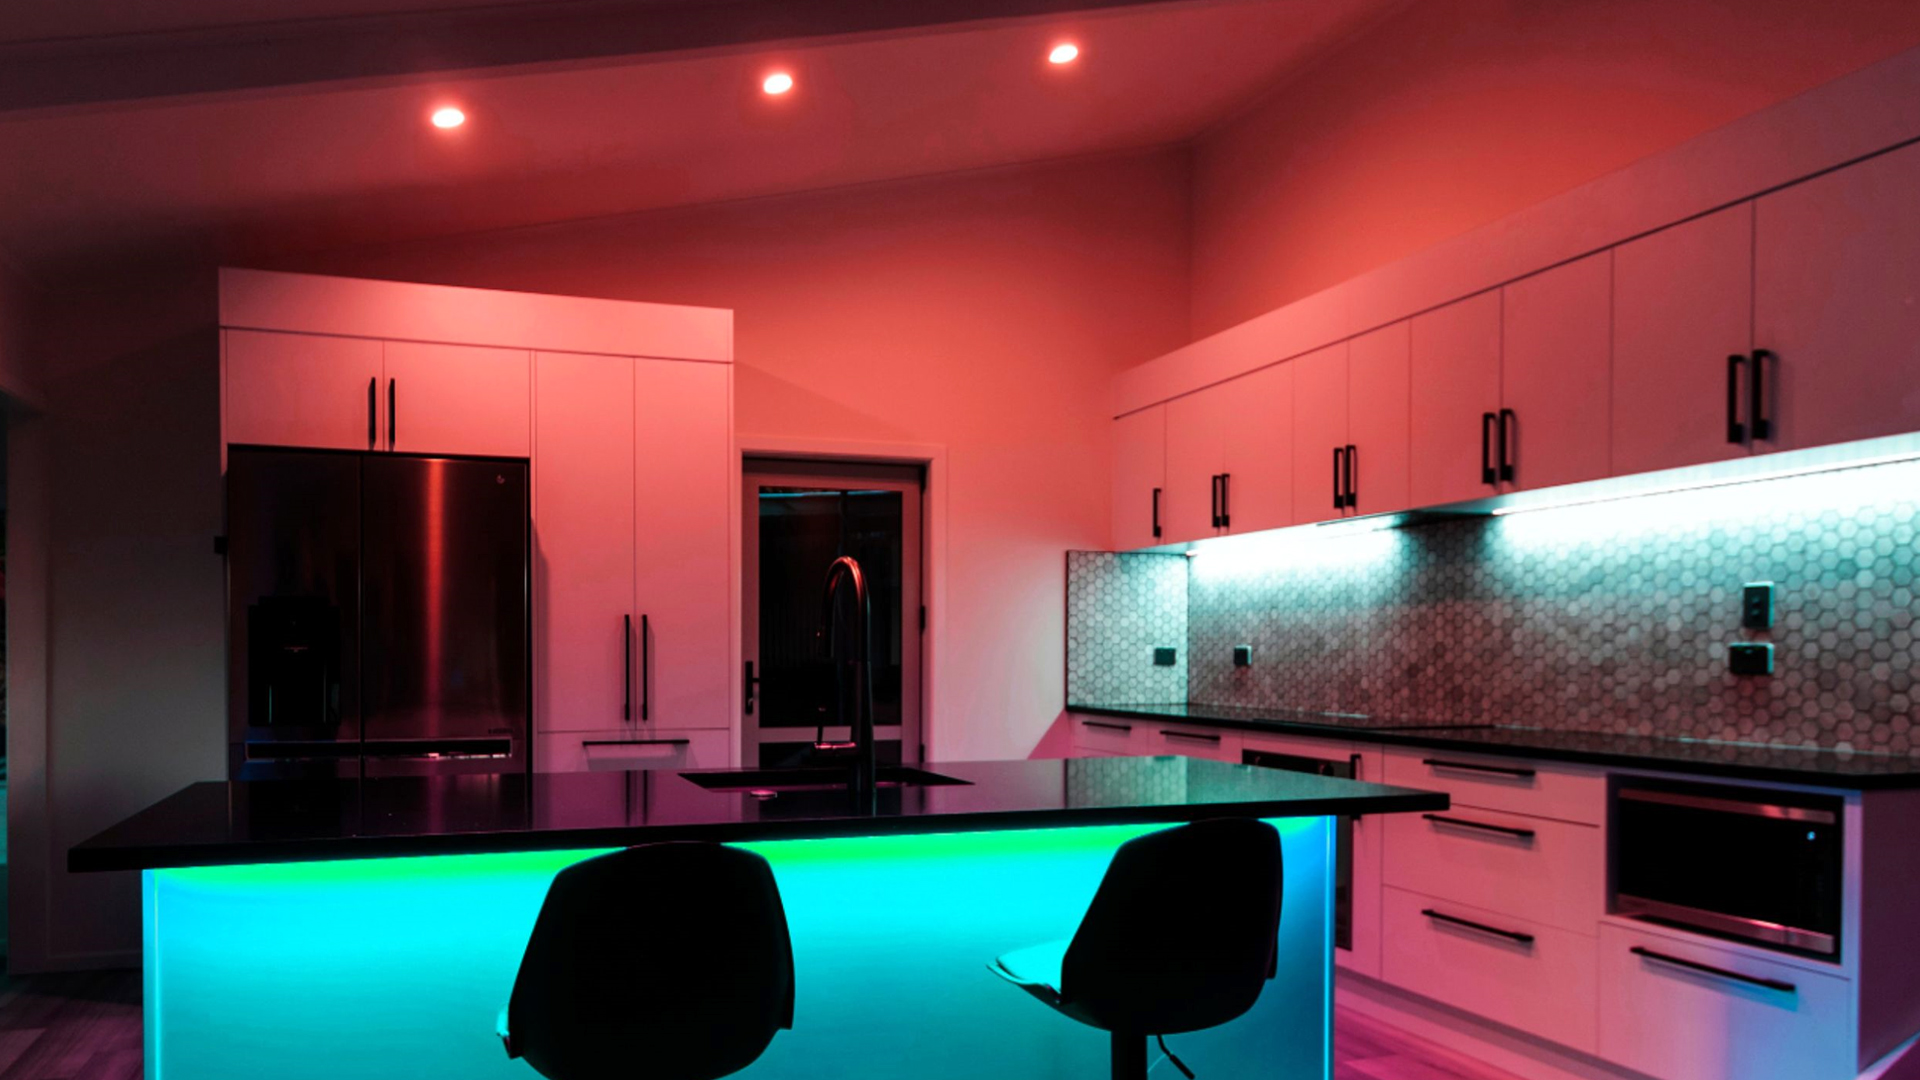 Light up the kitchen with LIFX smart bulbs and light strips